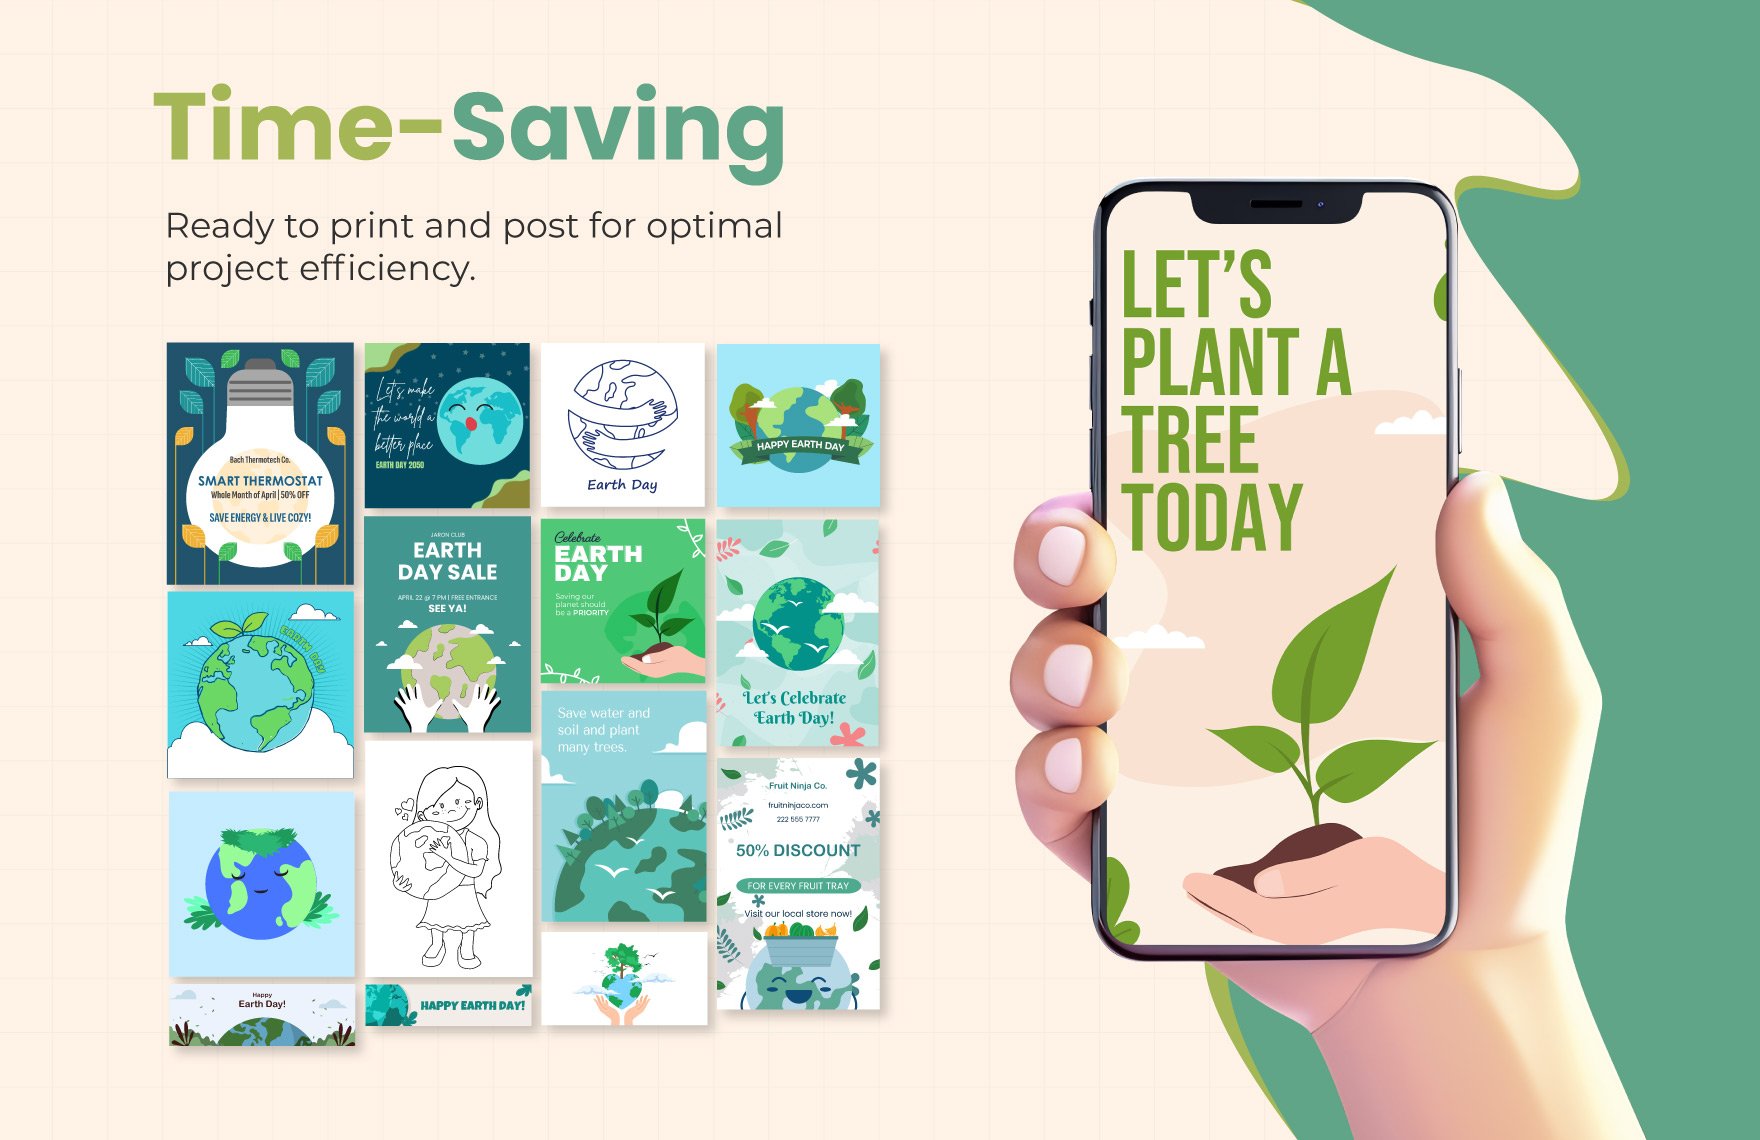 20+ Earth Day Template Bundle